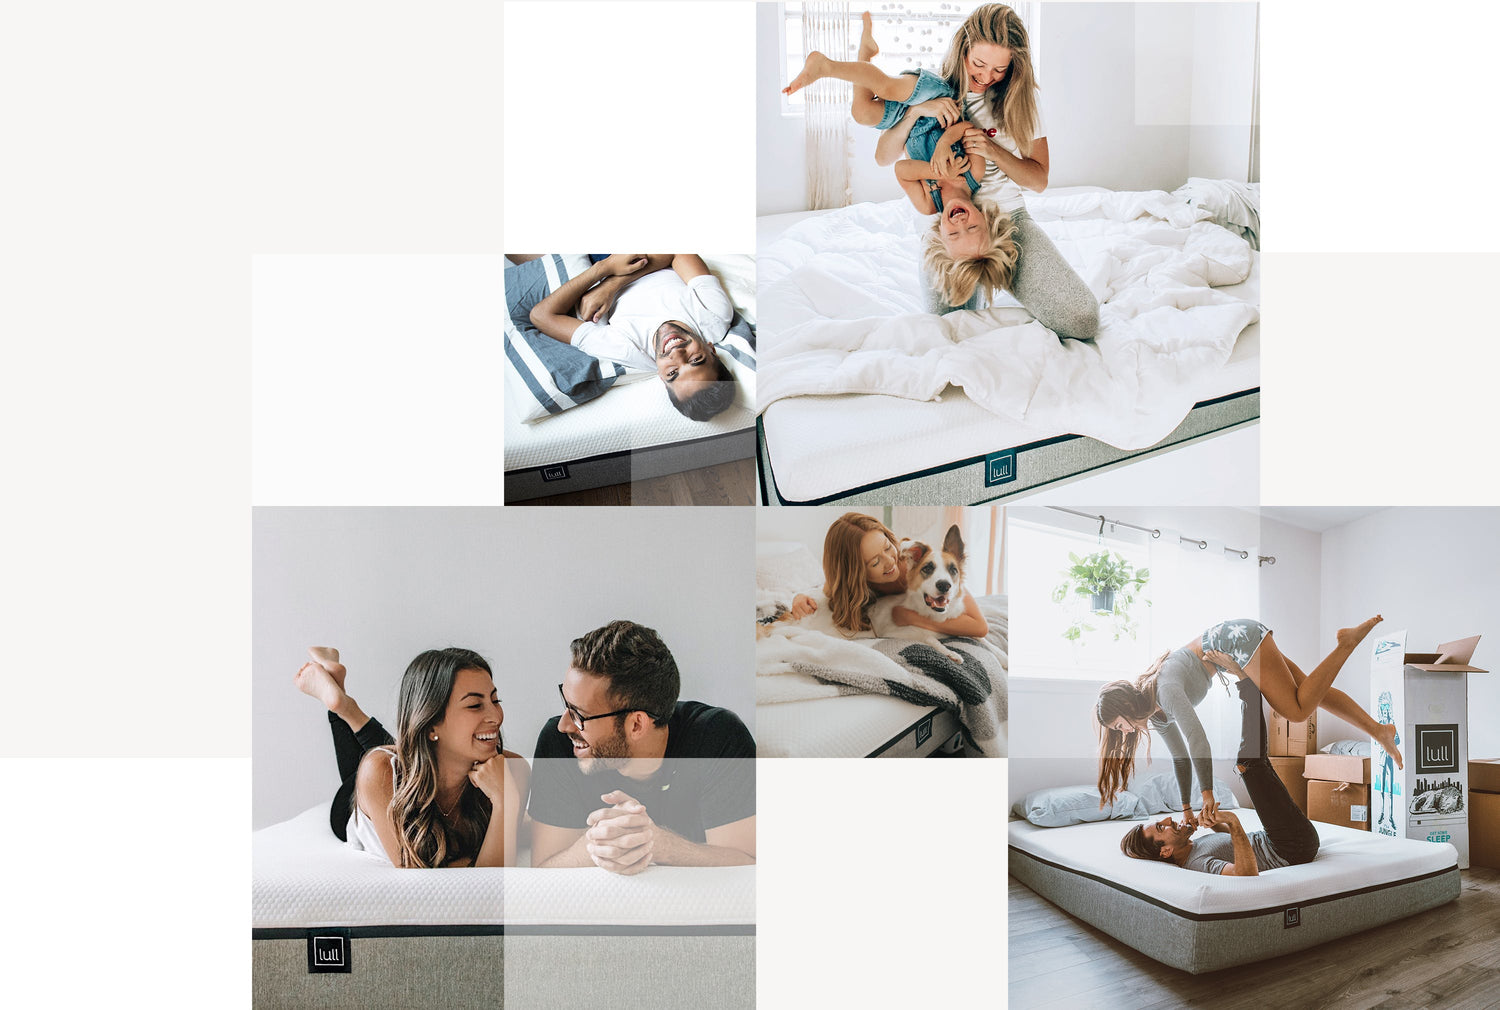 A collage of images of people enjoying their lull mattress and getting better sleep.